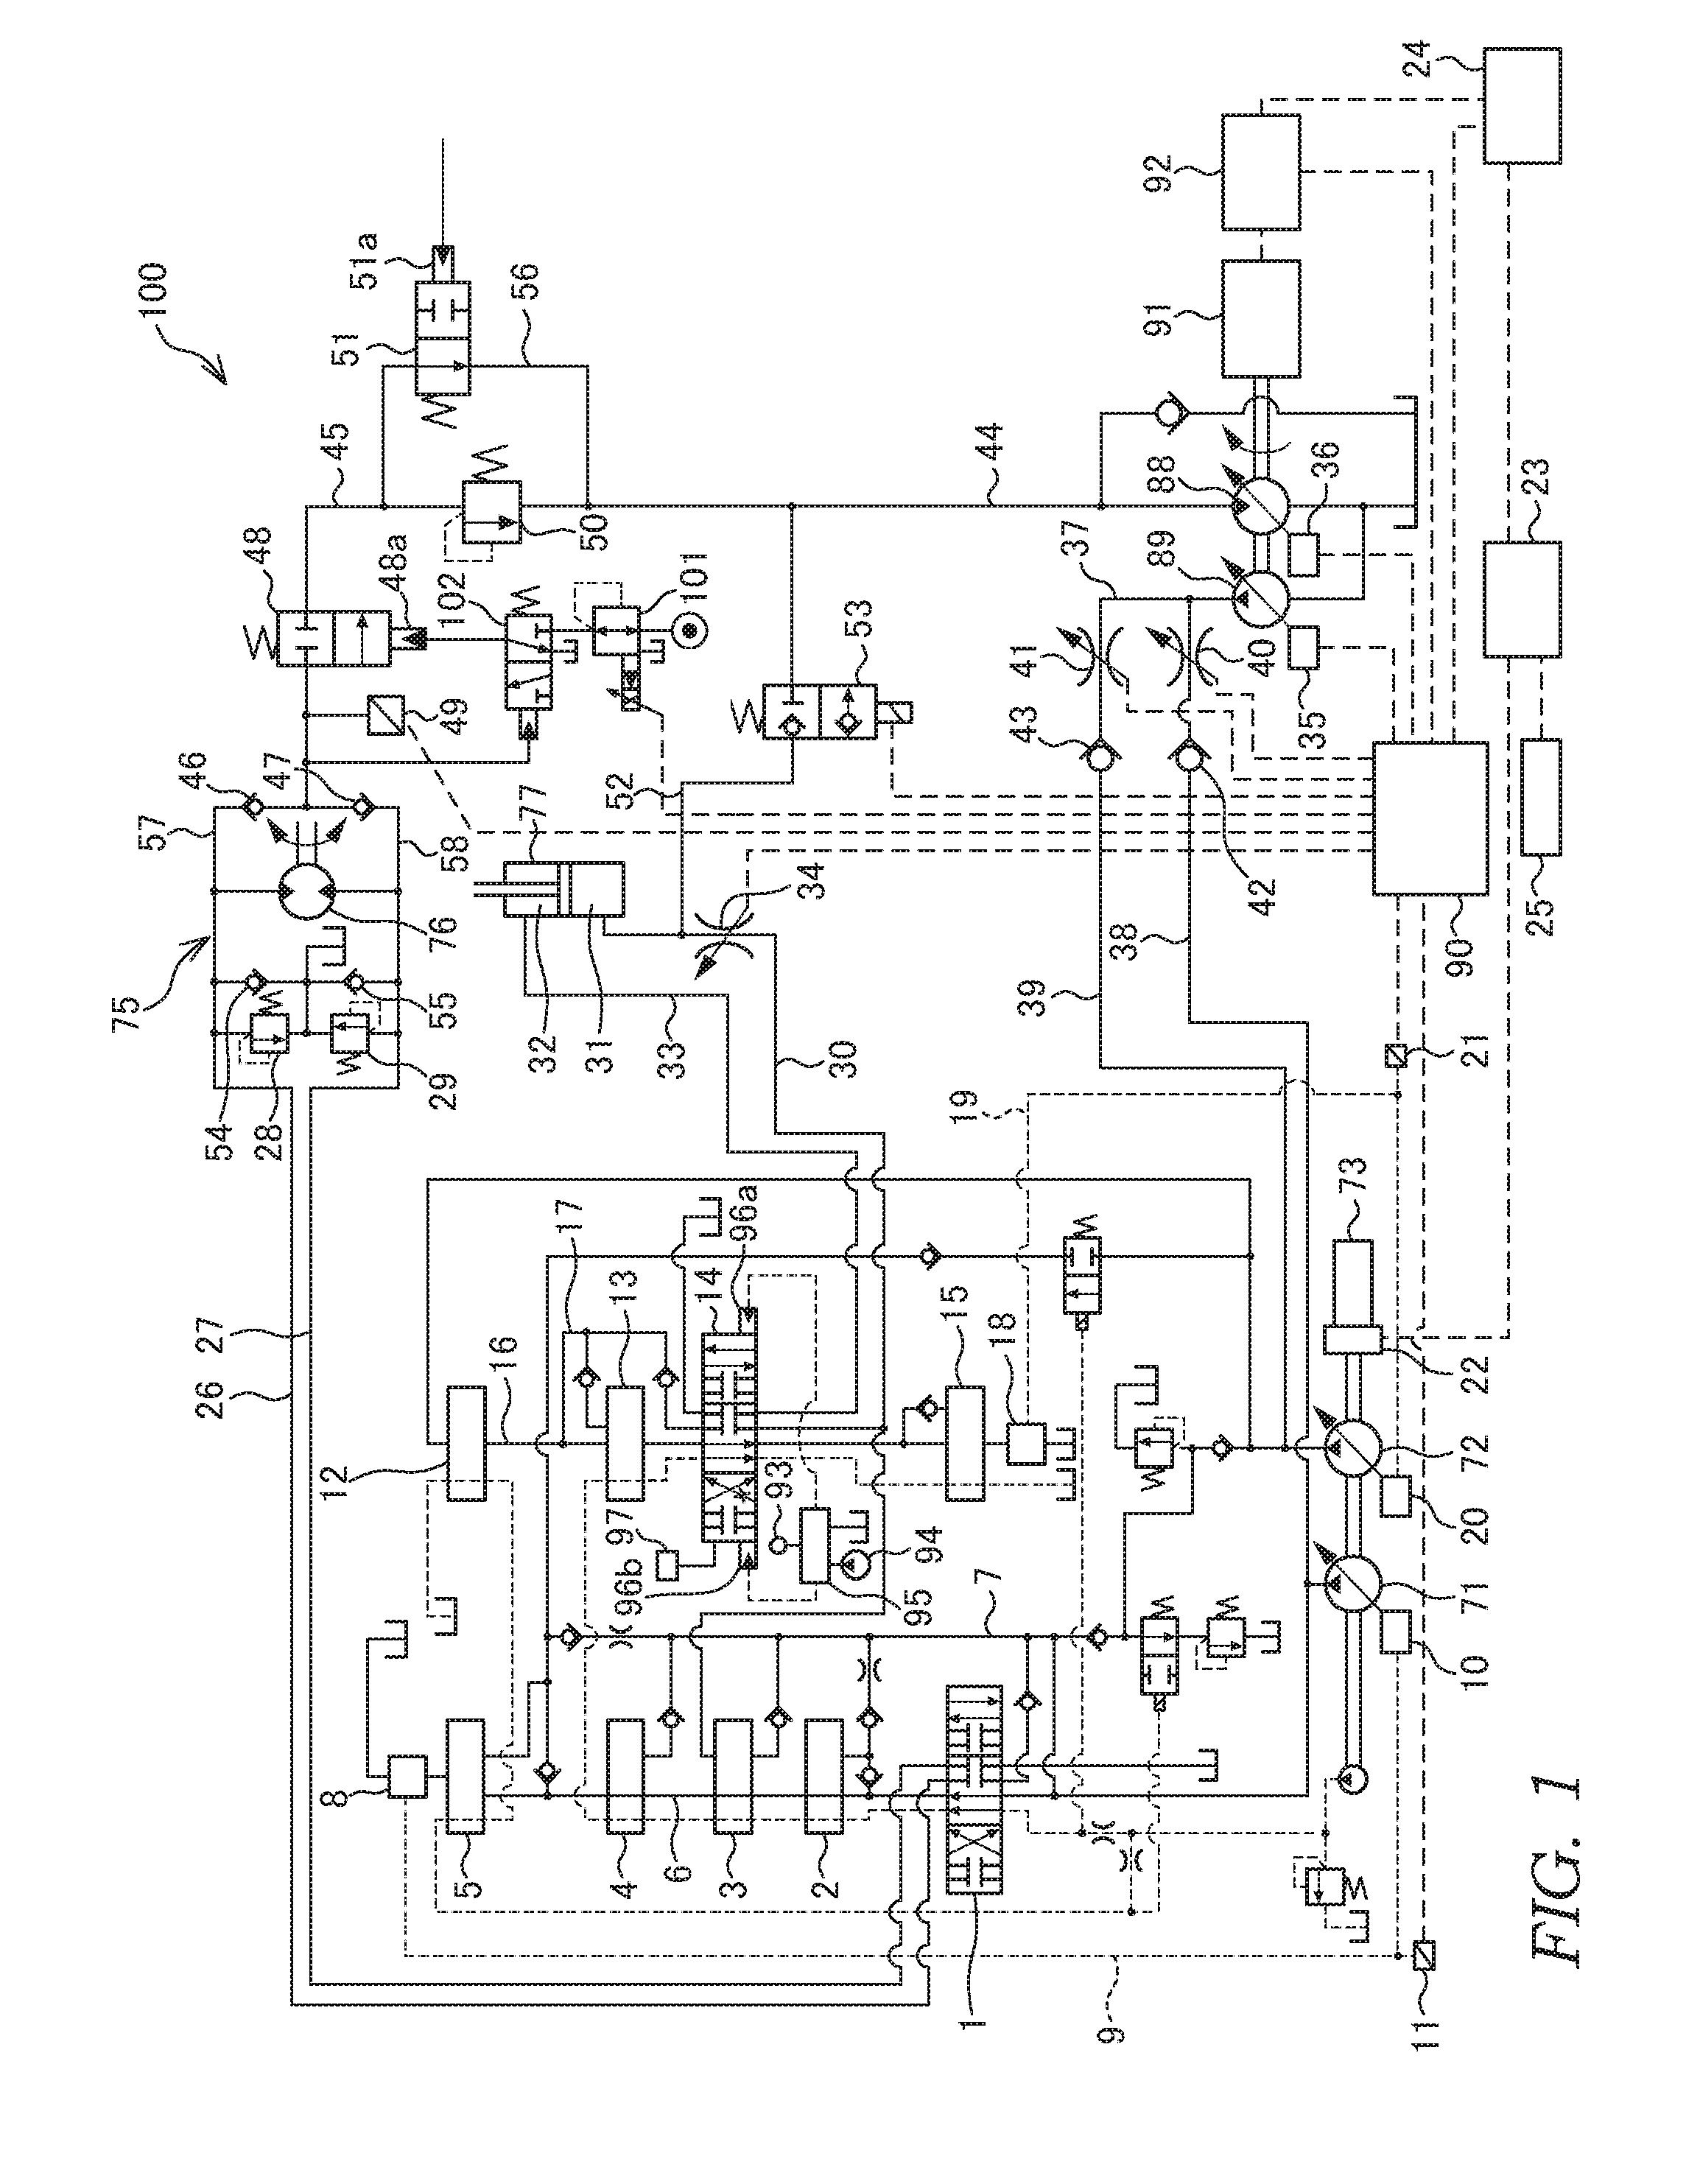 Control system for hybrid construction machine